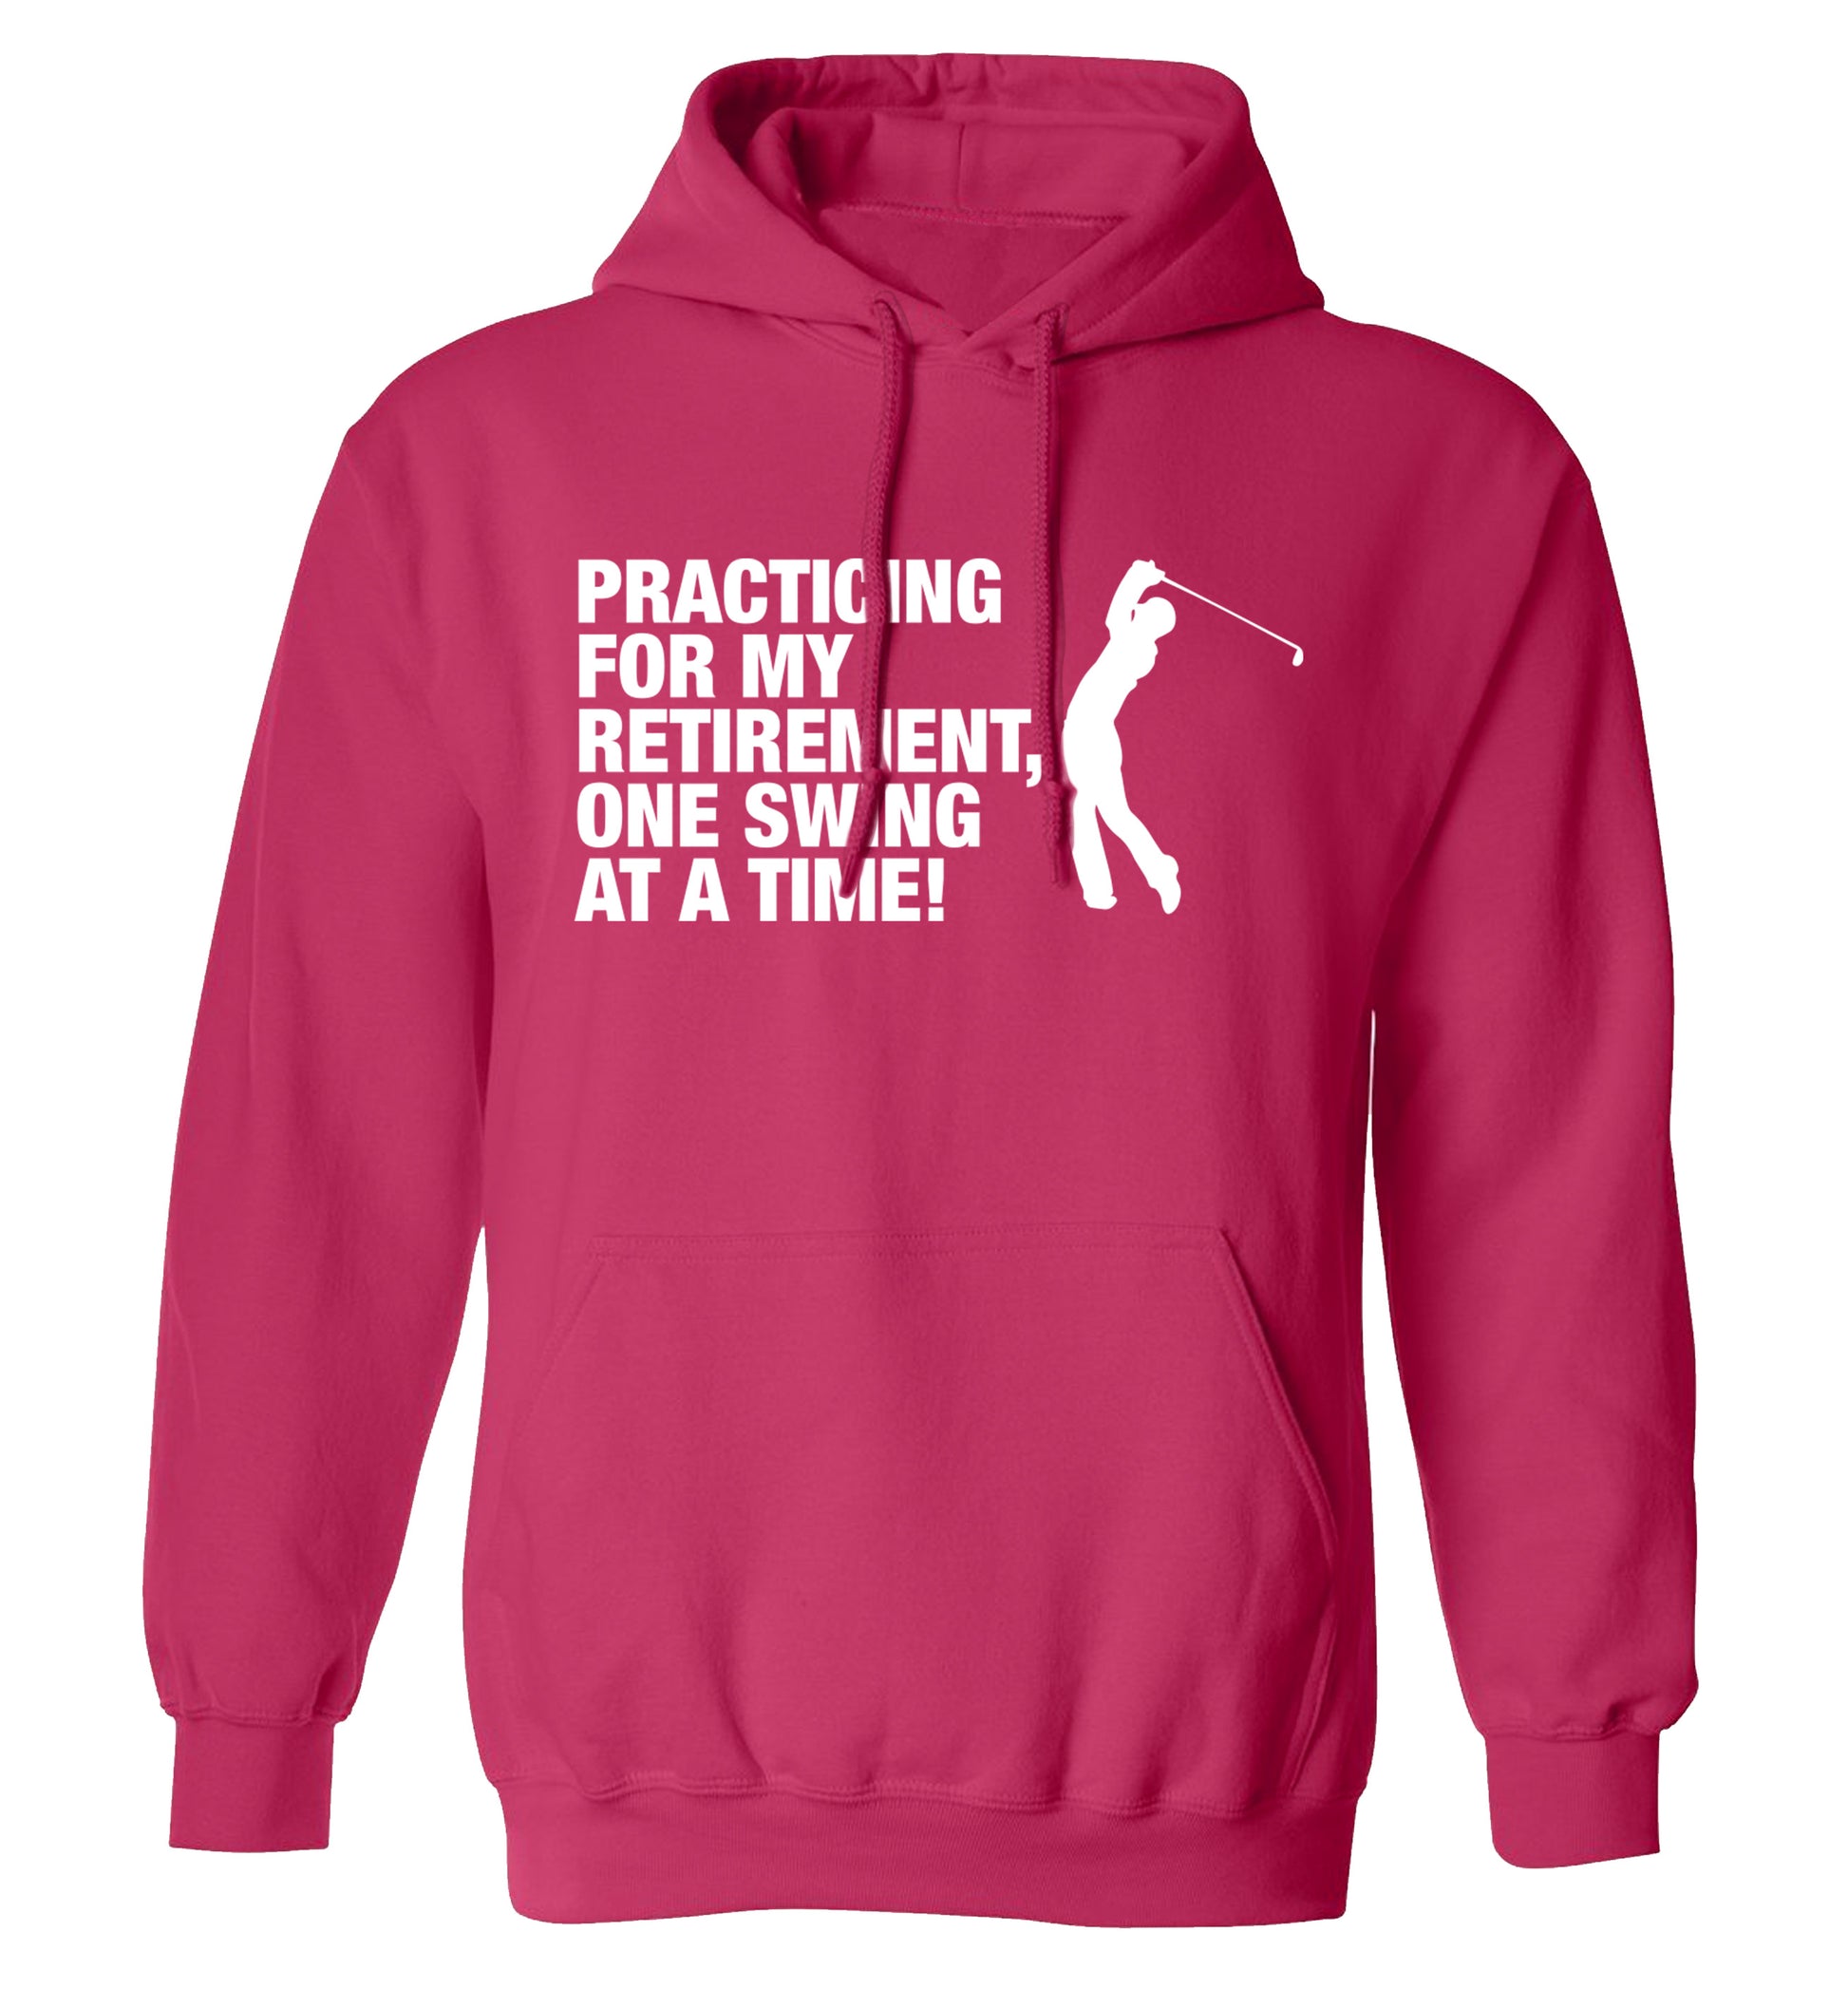 Practicing for my retirement one swing at a time adults unisex pink hoodie 2XL